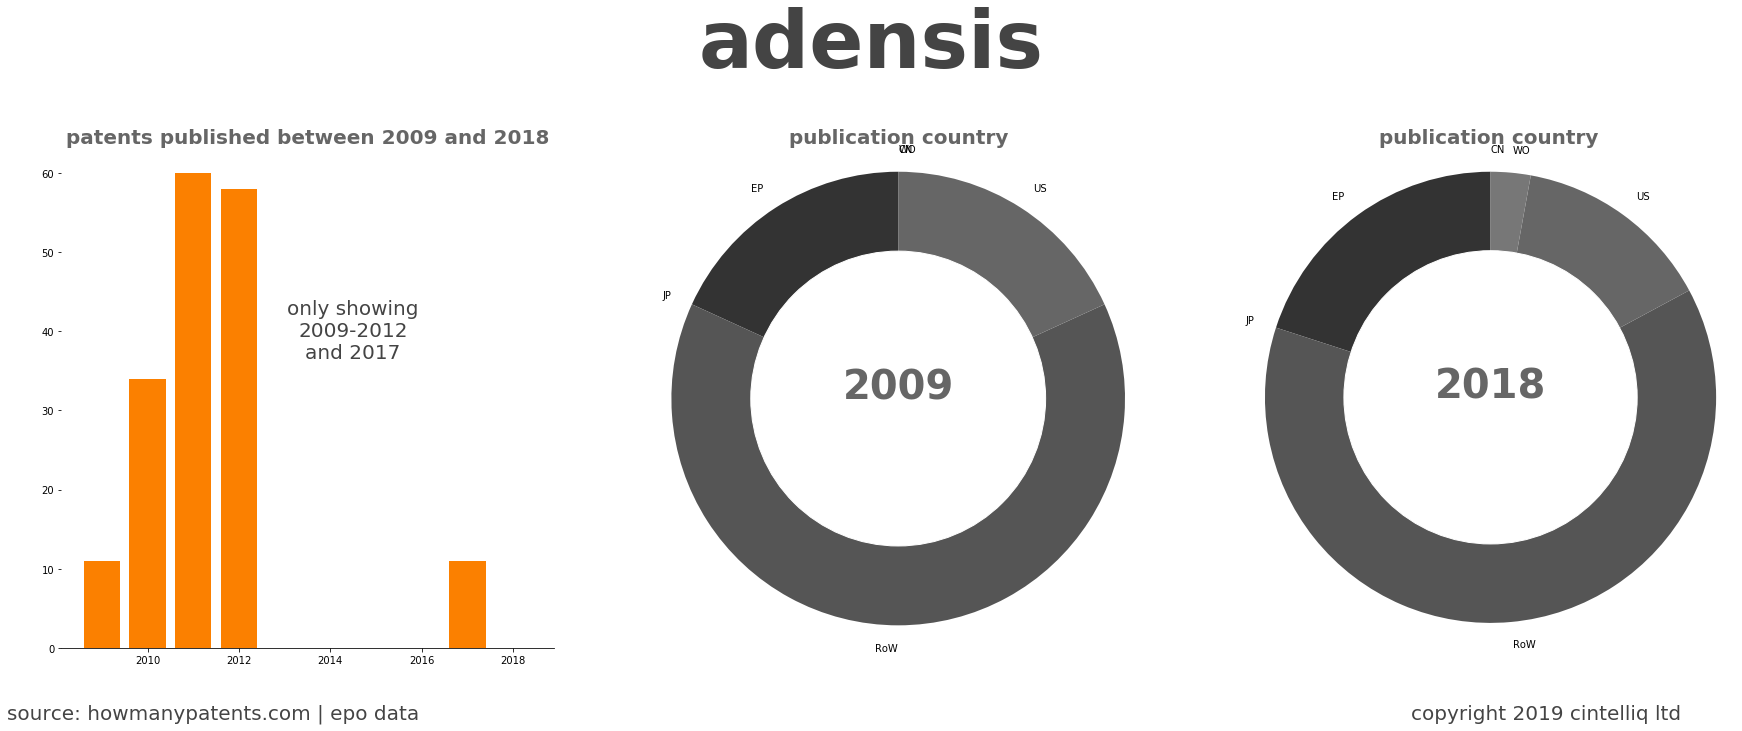 summary of patents for Adensis